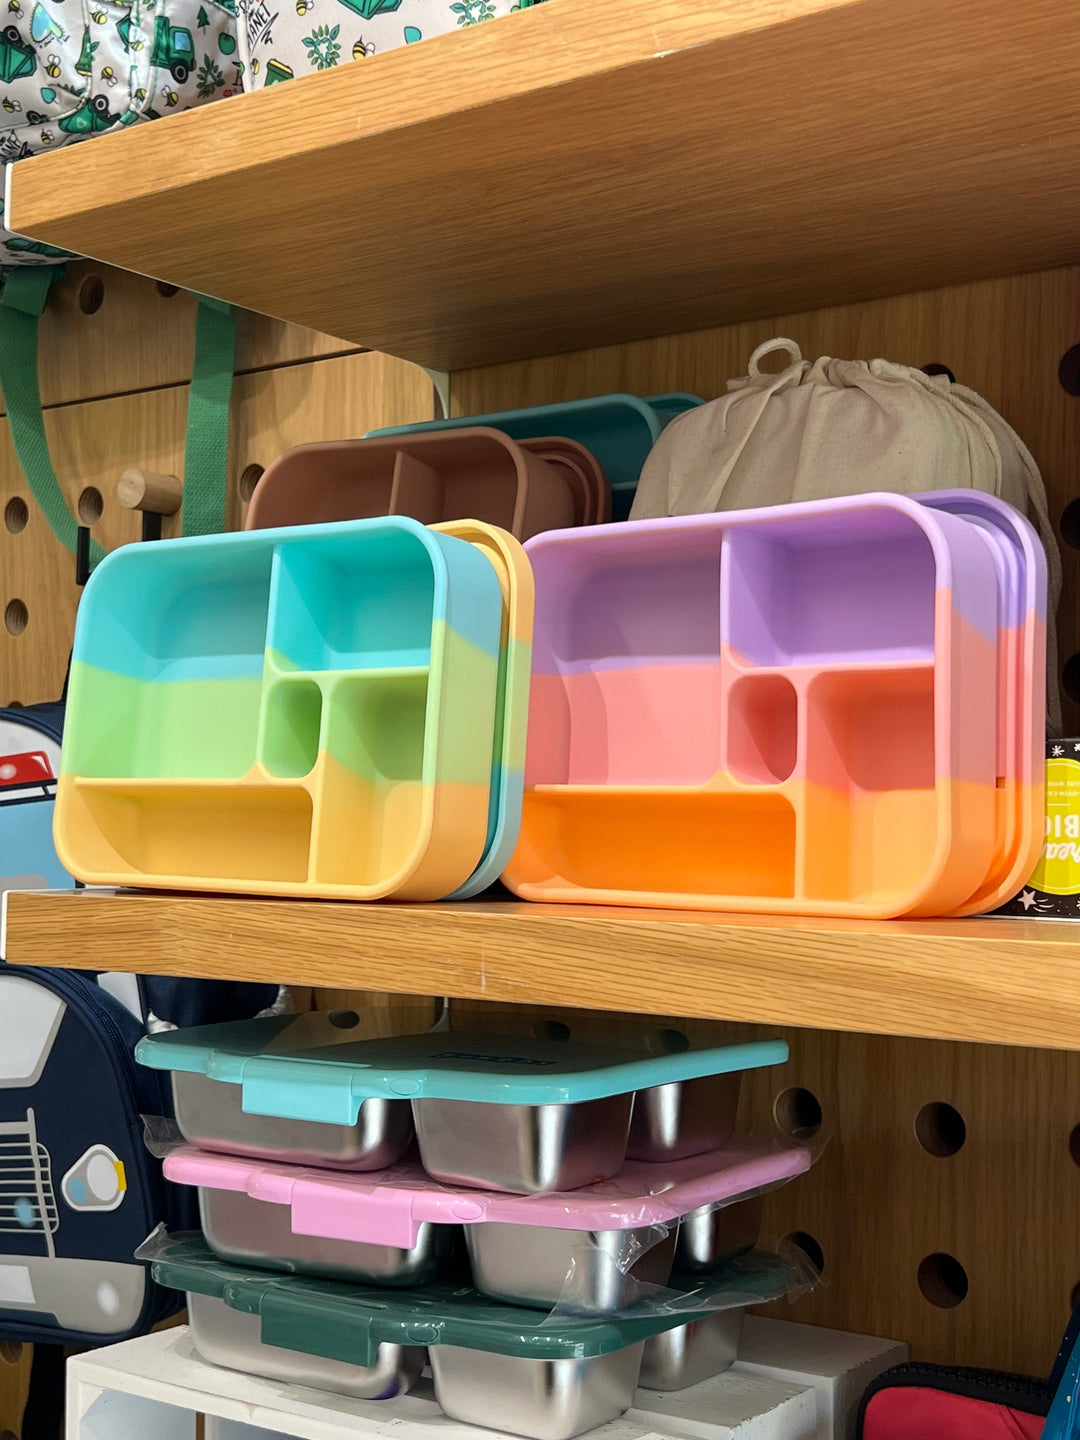 Silicone Bento Lunch Box - Paddle Pop